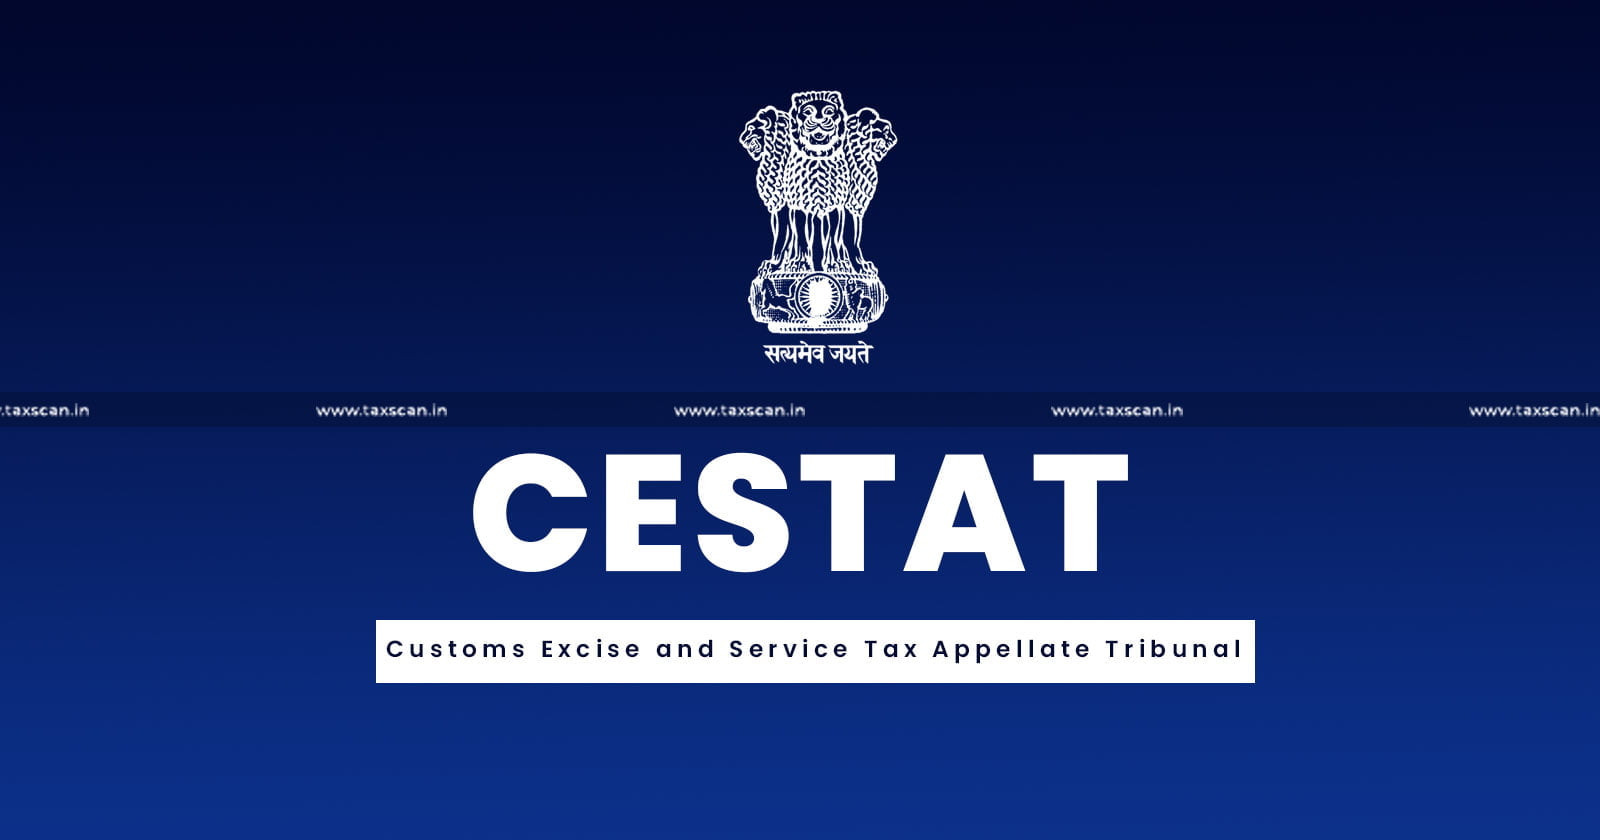 In Absence - Proof of Receipt - Order-in-Original - Appellant - Speed Post, same can't be held to have been Served- CESTAT-TAXSCAN